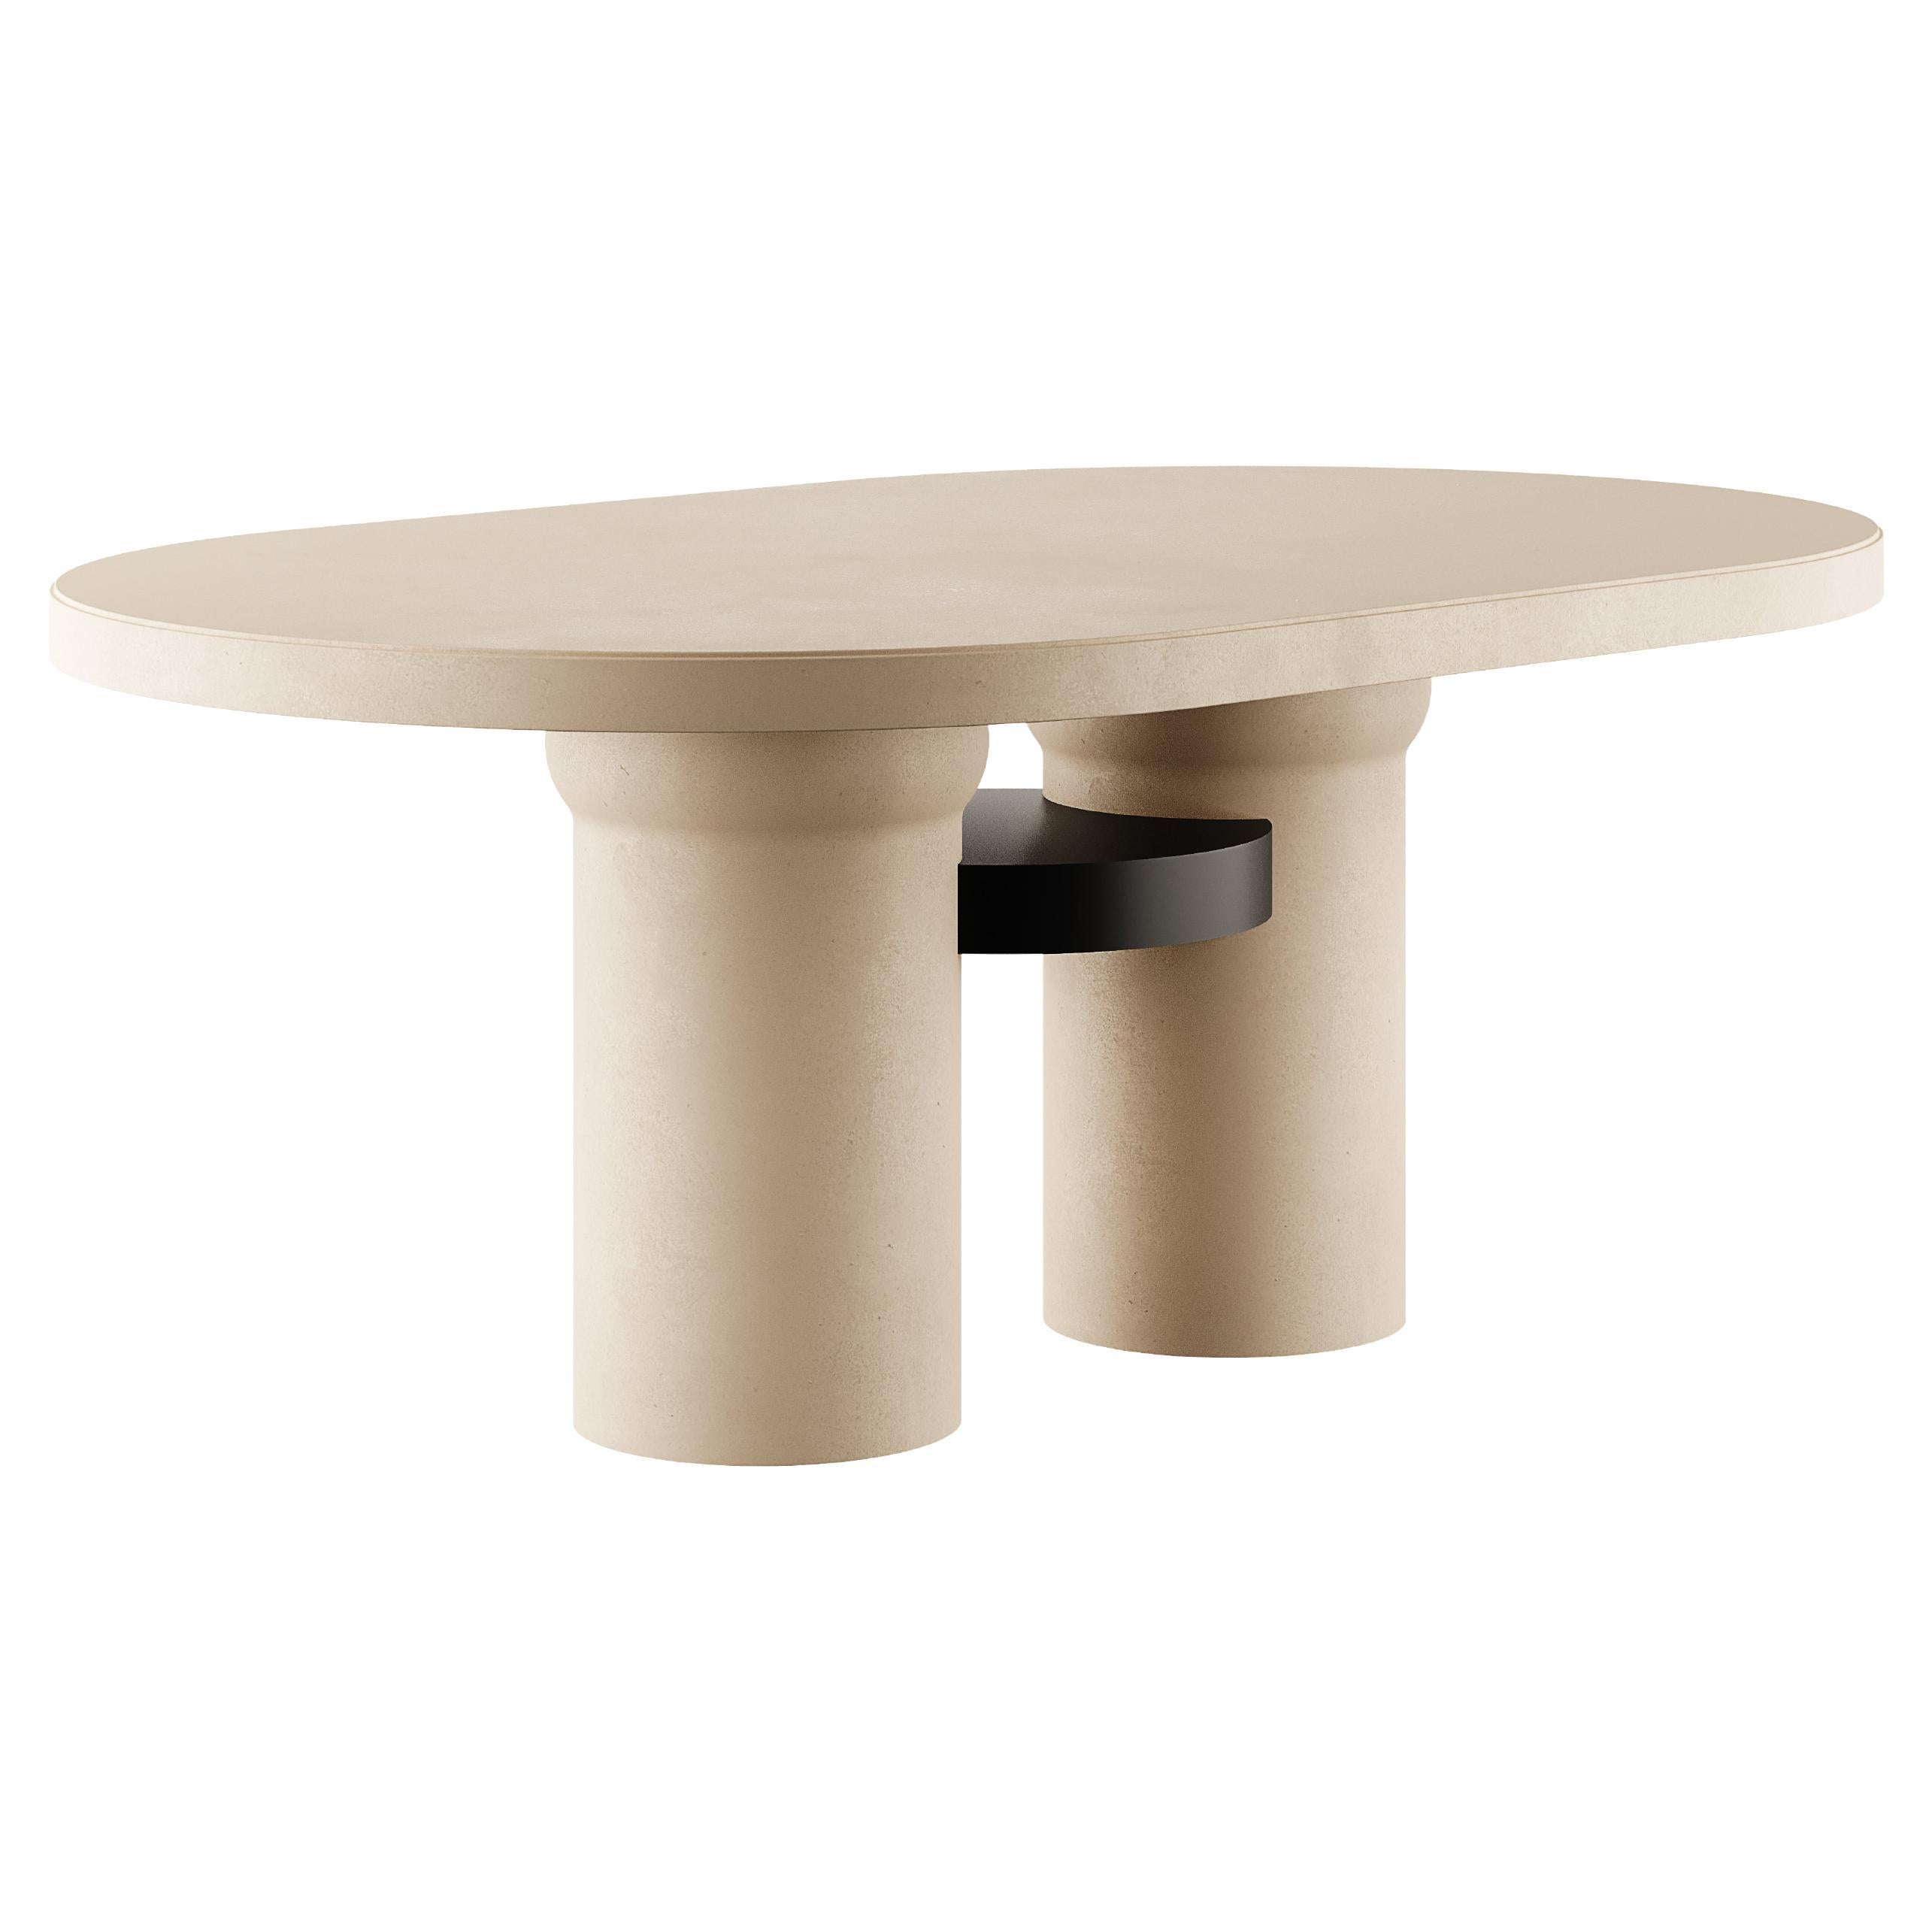 Modern Brutalist Oval Dining Table Microcement Sand & Black Matte Lacquer Detail